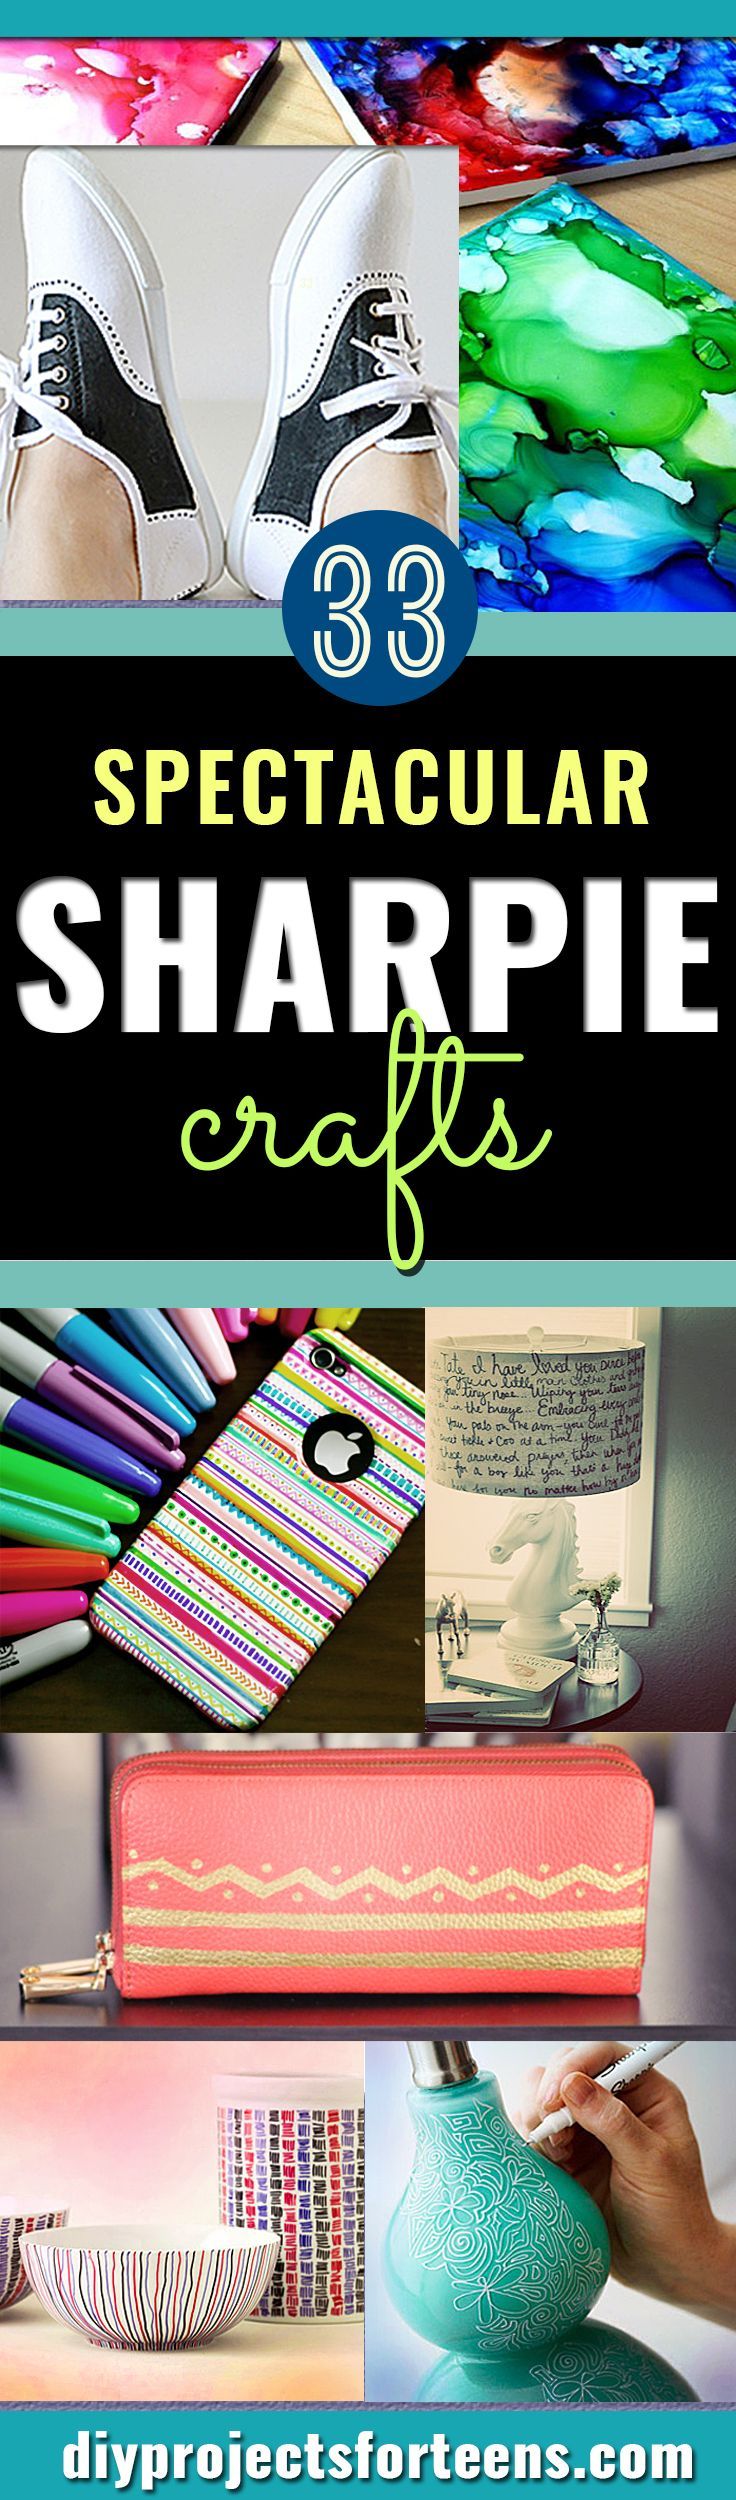 Cool Sharpie Crafts and Fun DIY Ideas with Sharpies. Awesome Decor and Fashion for Teens, Kids and Adults